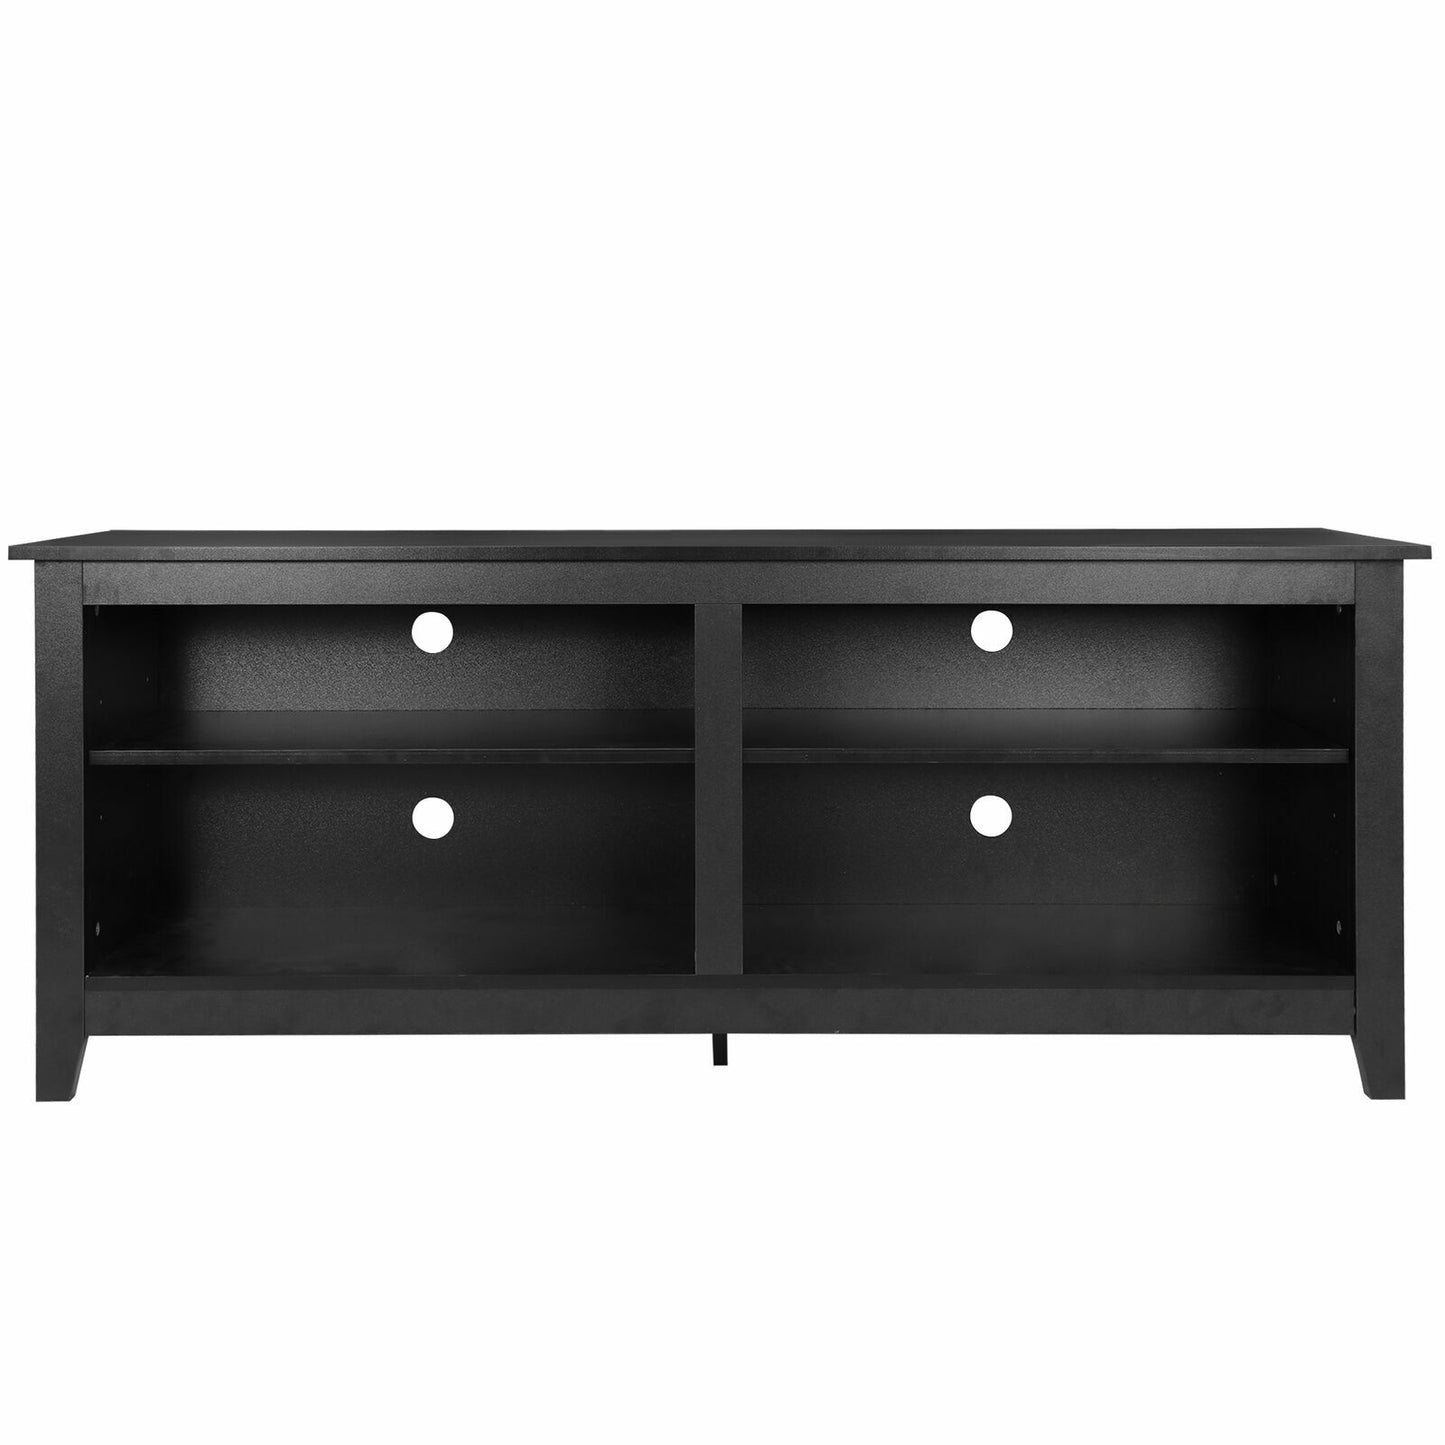 58“ Home Living Room TV Stand Up to 65" Display 3 Tiers Classic Black 4 Cubbies